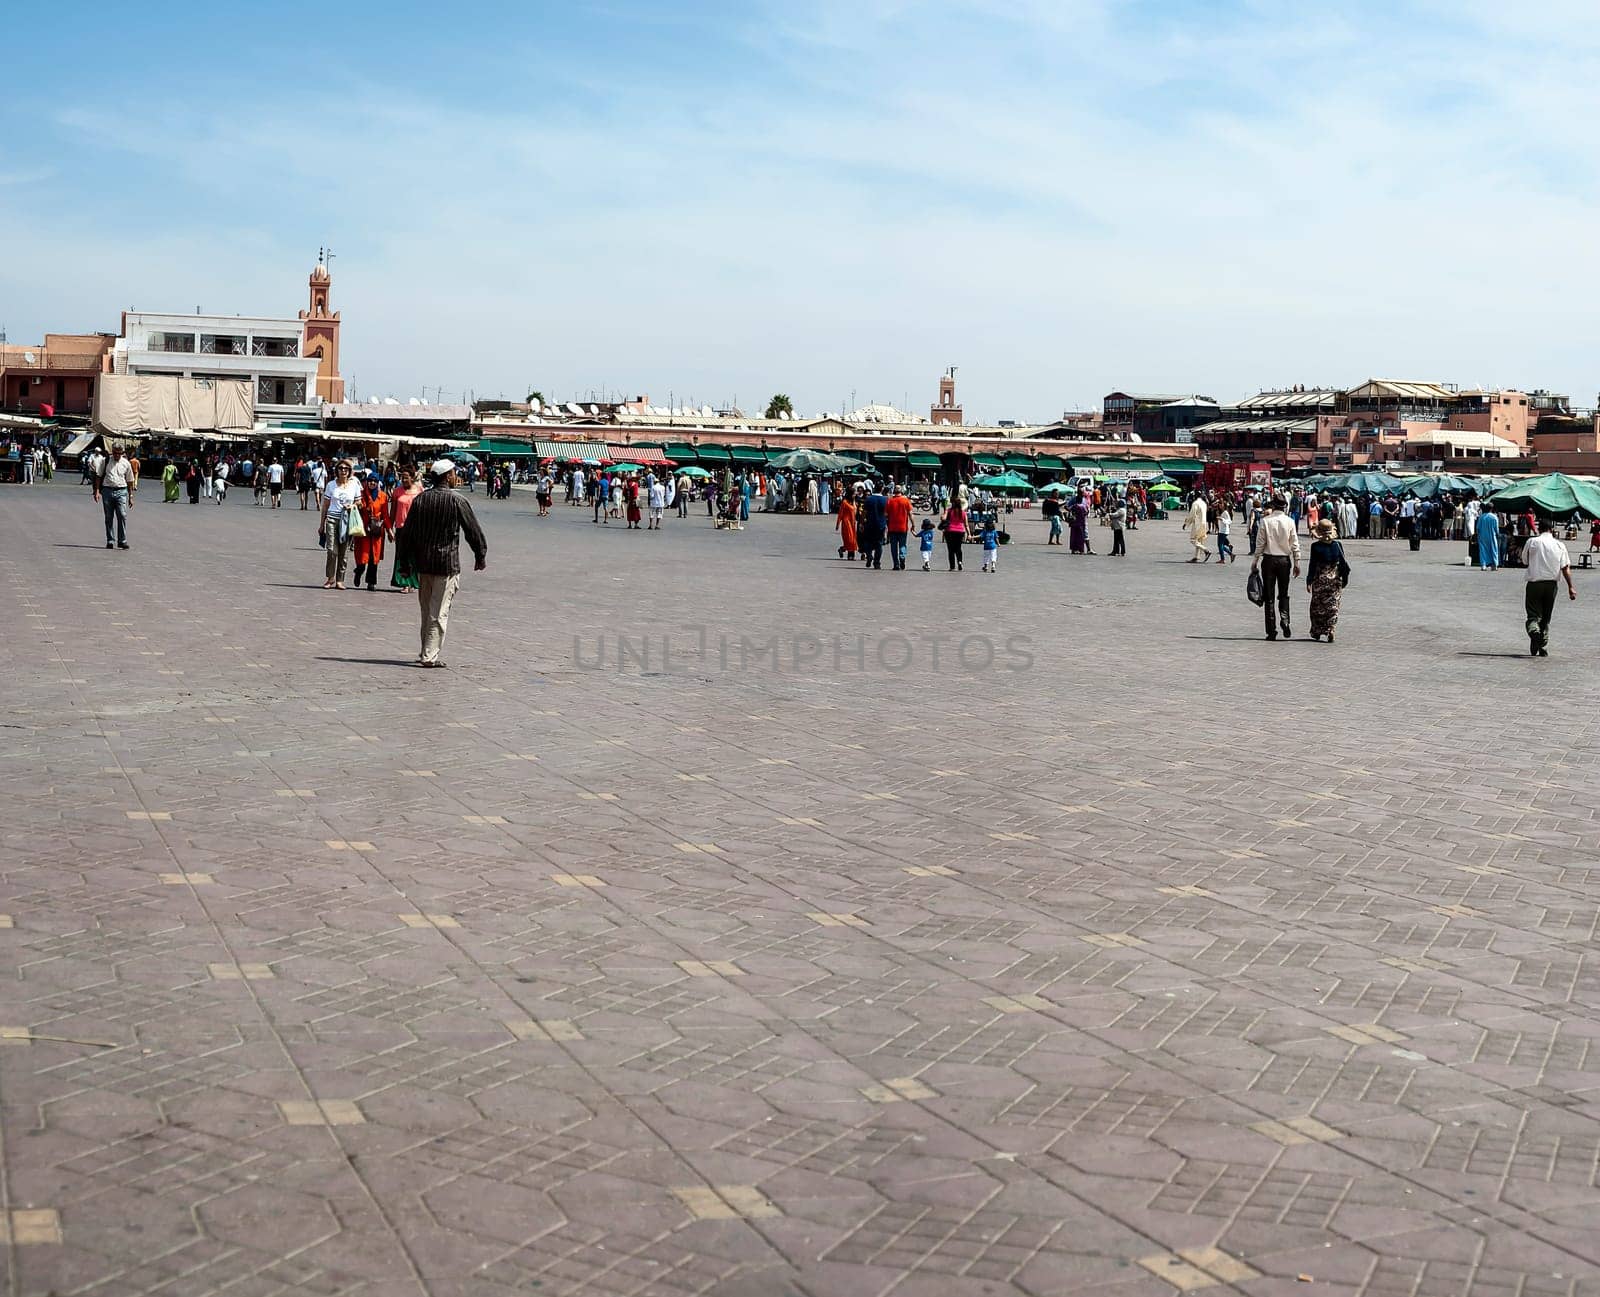 View of Jemaa el fna, Marrakech, Morocco by Giamplume